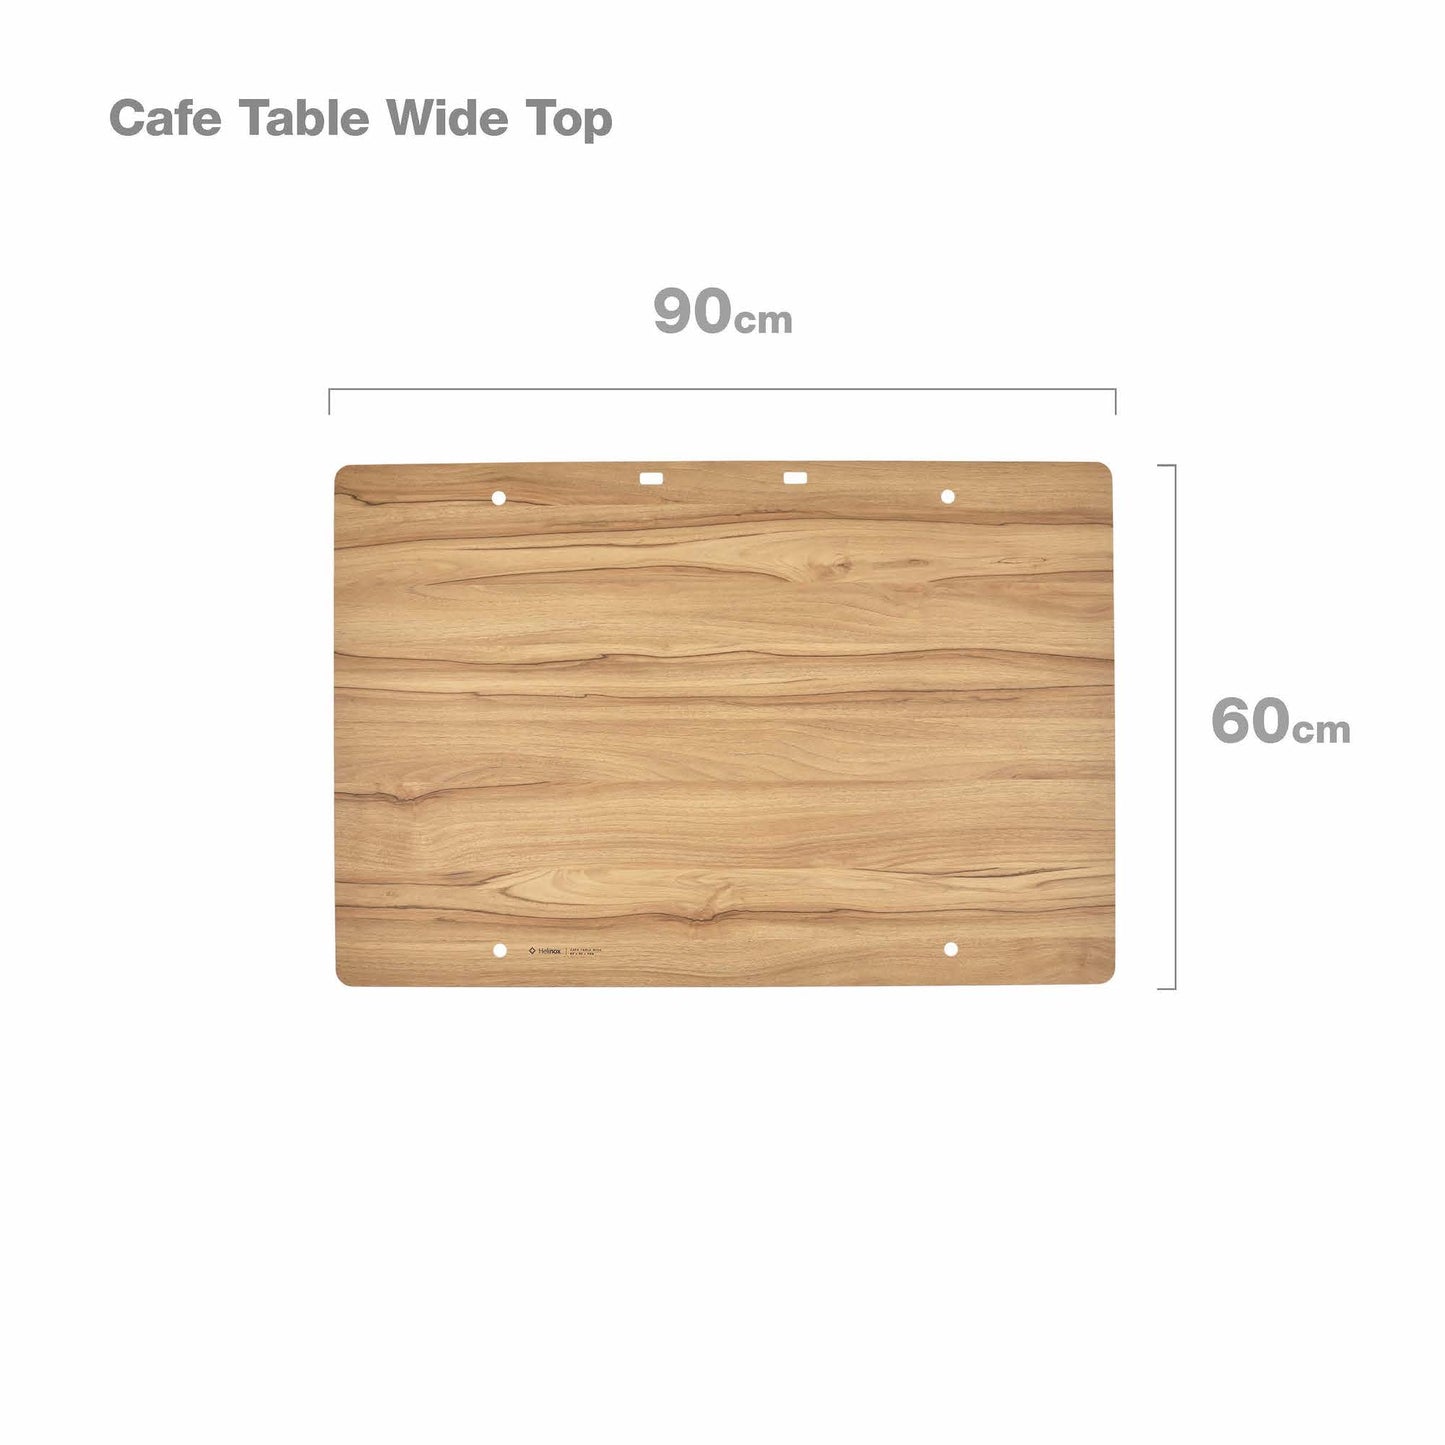 Cafe Table Home Wide Top - Classic Walnut